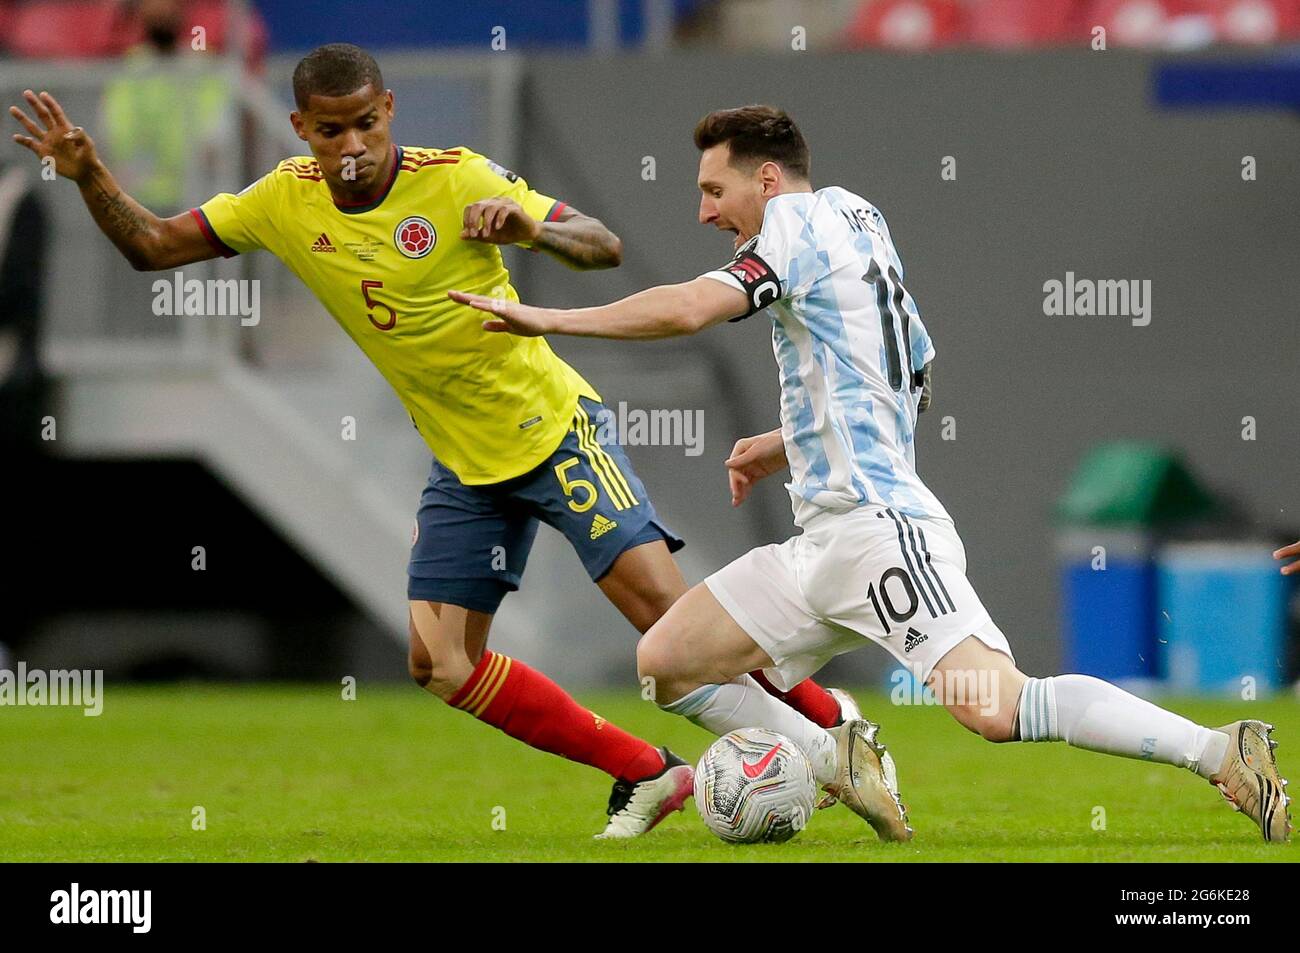 Brasilia, Brazil. 6th July, 2021. Lionel Messi (R) of Argentina vies with Wilmar Barrios of Colombia during the 2021 Copa America Semifinals football match between Argentina and Colombia in Brasilia, Brazil, on July 6, 2021. Credit: Lucio Tavora/Xinhua/Alamy Live News Stock Photo